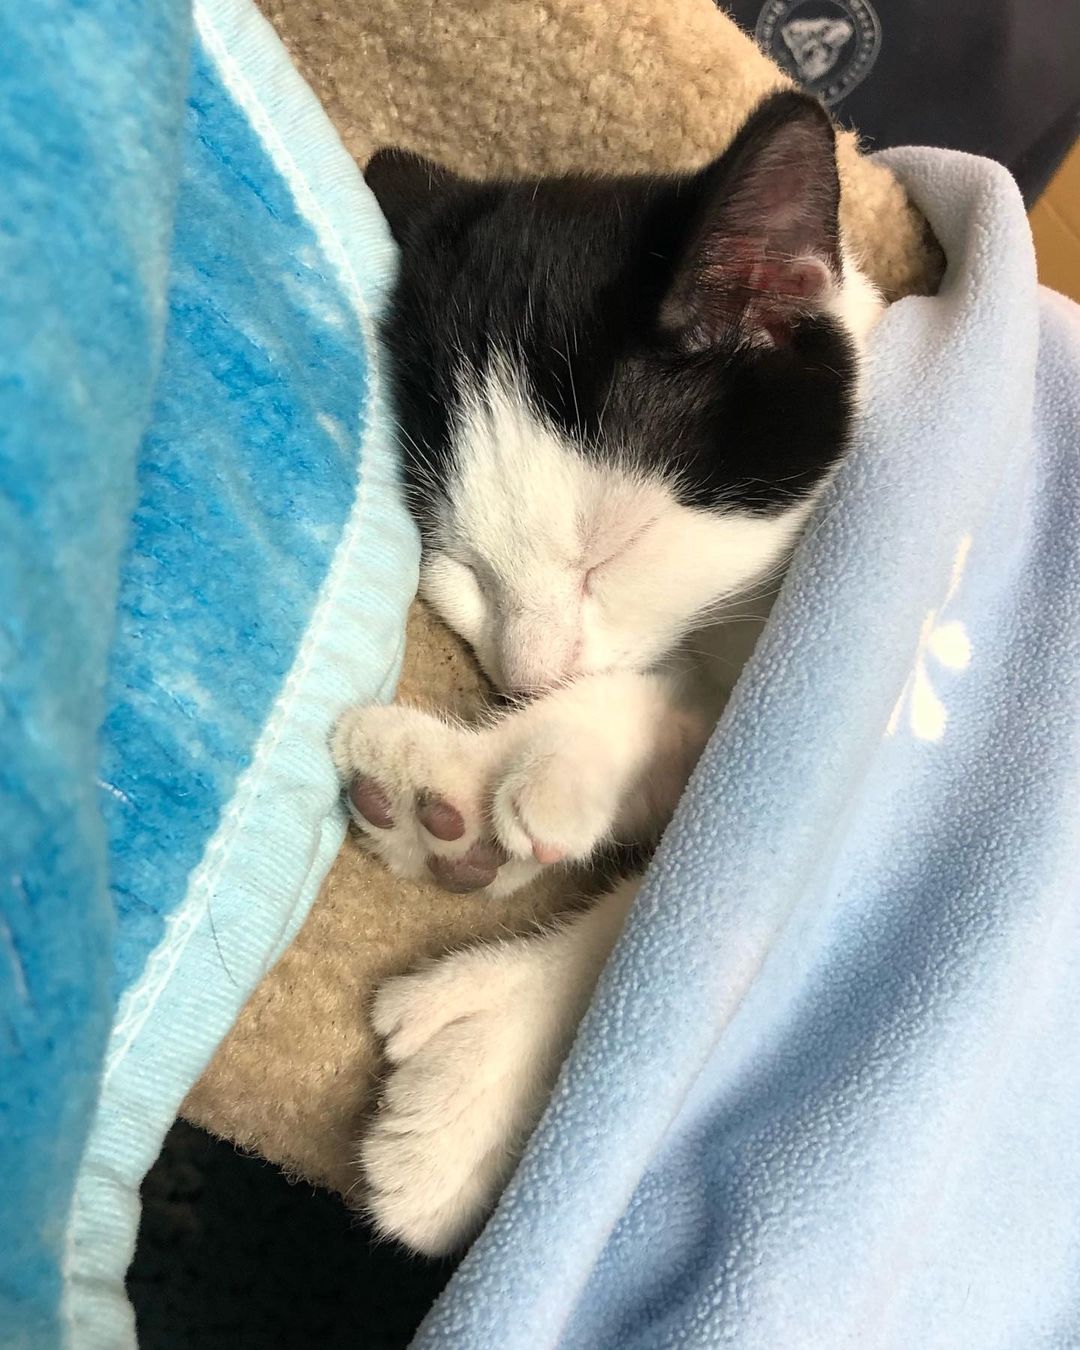 Rainy mornings are made for sleeping in…and, kittens! And, goodness, do we have lots of kittens available for adoption! If you’ve been thinking of adopting a furry, feline youngster (or two!), give us a call to schedule your visit with the next love(s) of your life! 1-802-484-5829
<a target='_blank' href='https://www.instagram.com/explore/tags/adopt/'>#adopt</a> <a target='_blank' href='https://www.instagram.com/explore/tags/kittencrazy/'>#kittencrazy</a> <a target='_blank' href='https://www.instagram.com/explore/tags/catsofinstagram/'>#catsofinstagram</a>  <a target='_blank' href='https://www.instagram.com/explore/tags/shelterlove/'>#shelterlove</a> <a target='_blank' href='https://www.instagram.com/explore/tags/rainyday/'>#rainyday</a>